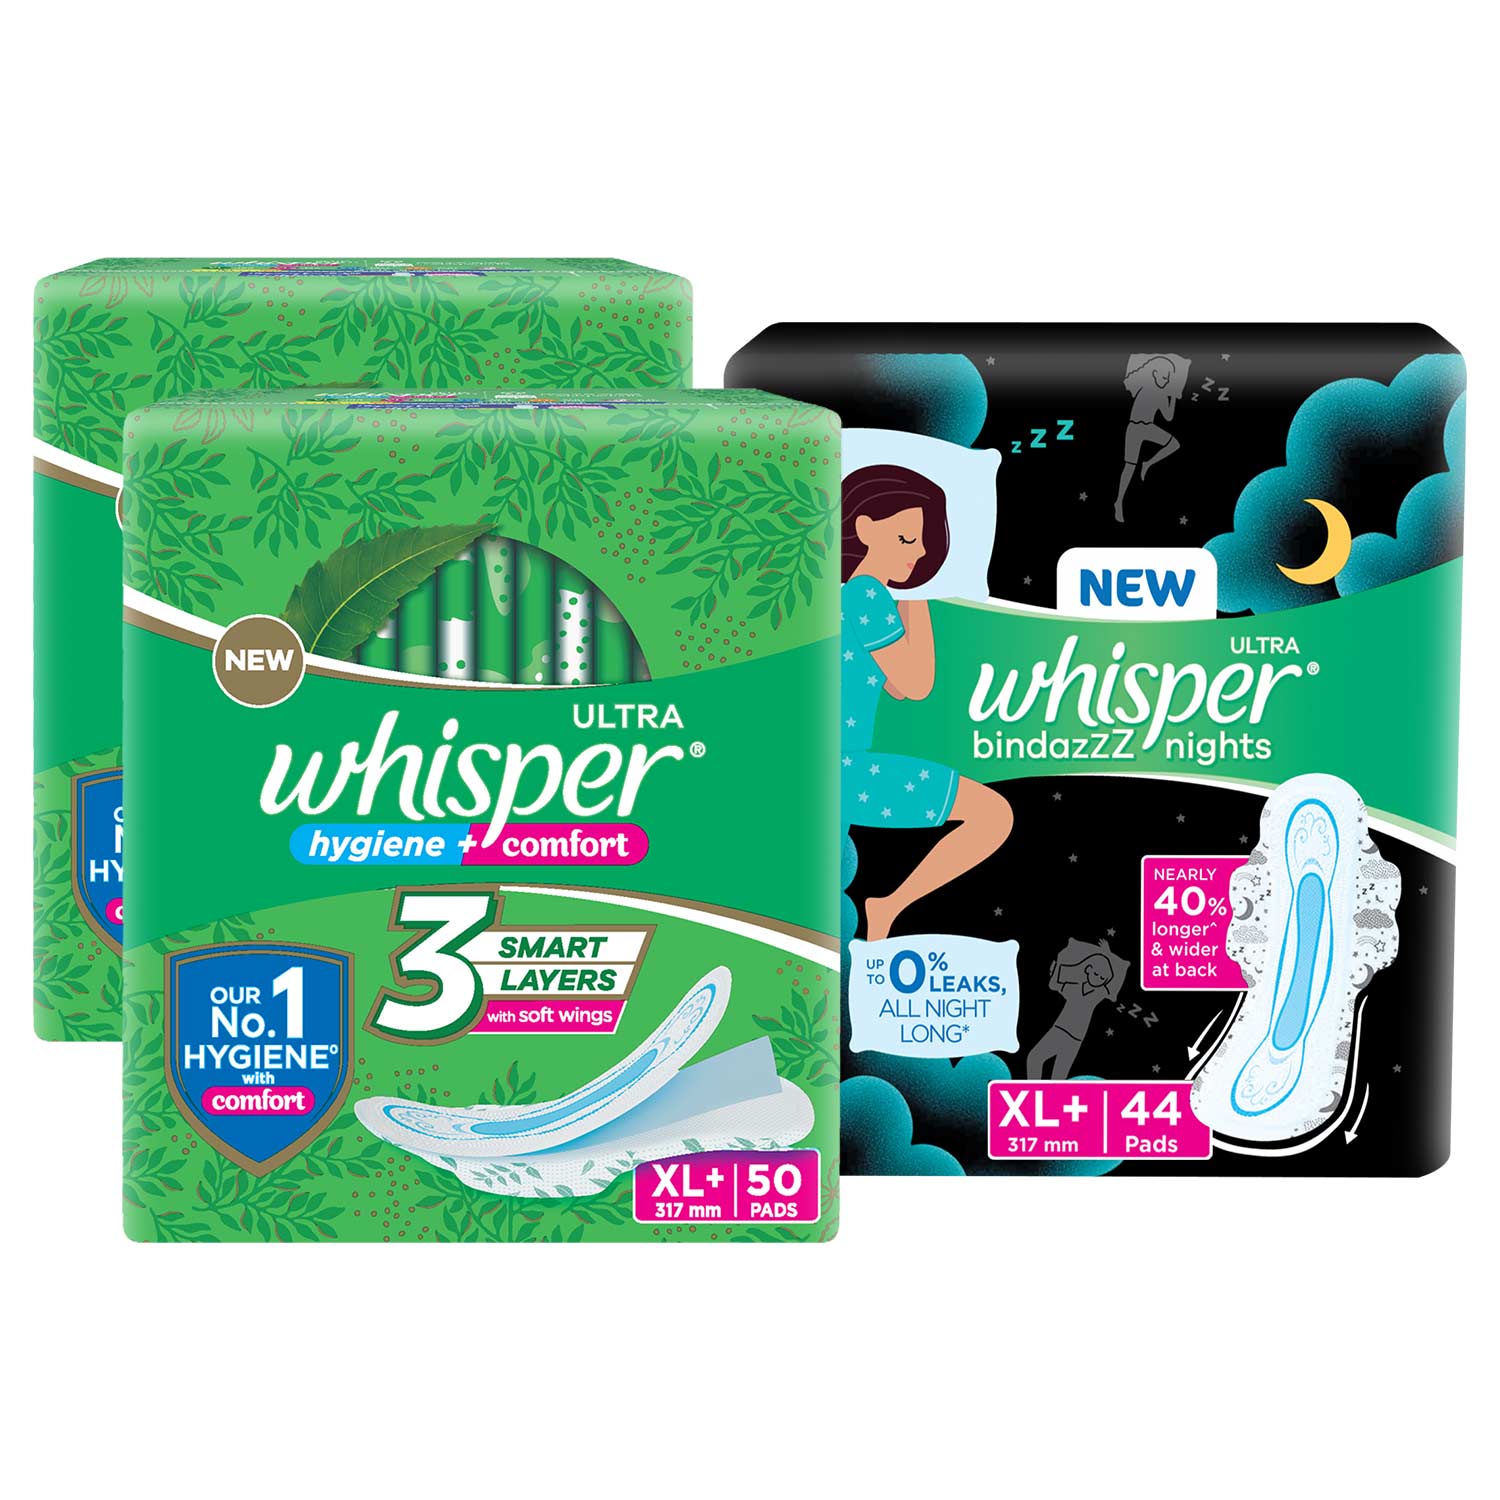 Whisper Day & Night Sanitary Pads|Pack of 144 thin Pads|100 Day + 44 Night pads|Complete period protection|50 Ultra Clean XL+ Pads with 44 Bindazzz Night XL+ Pads|Dry topsheet|With disposable wrap